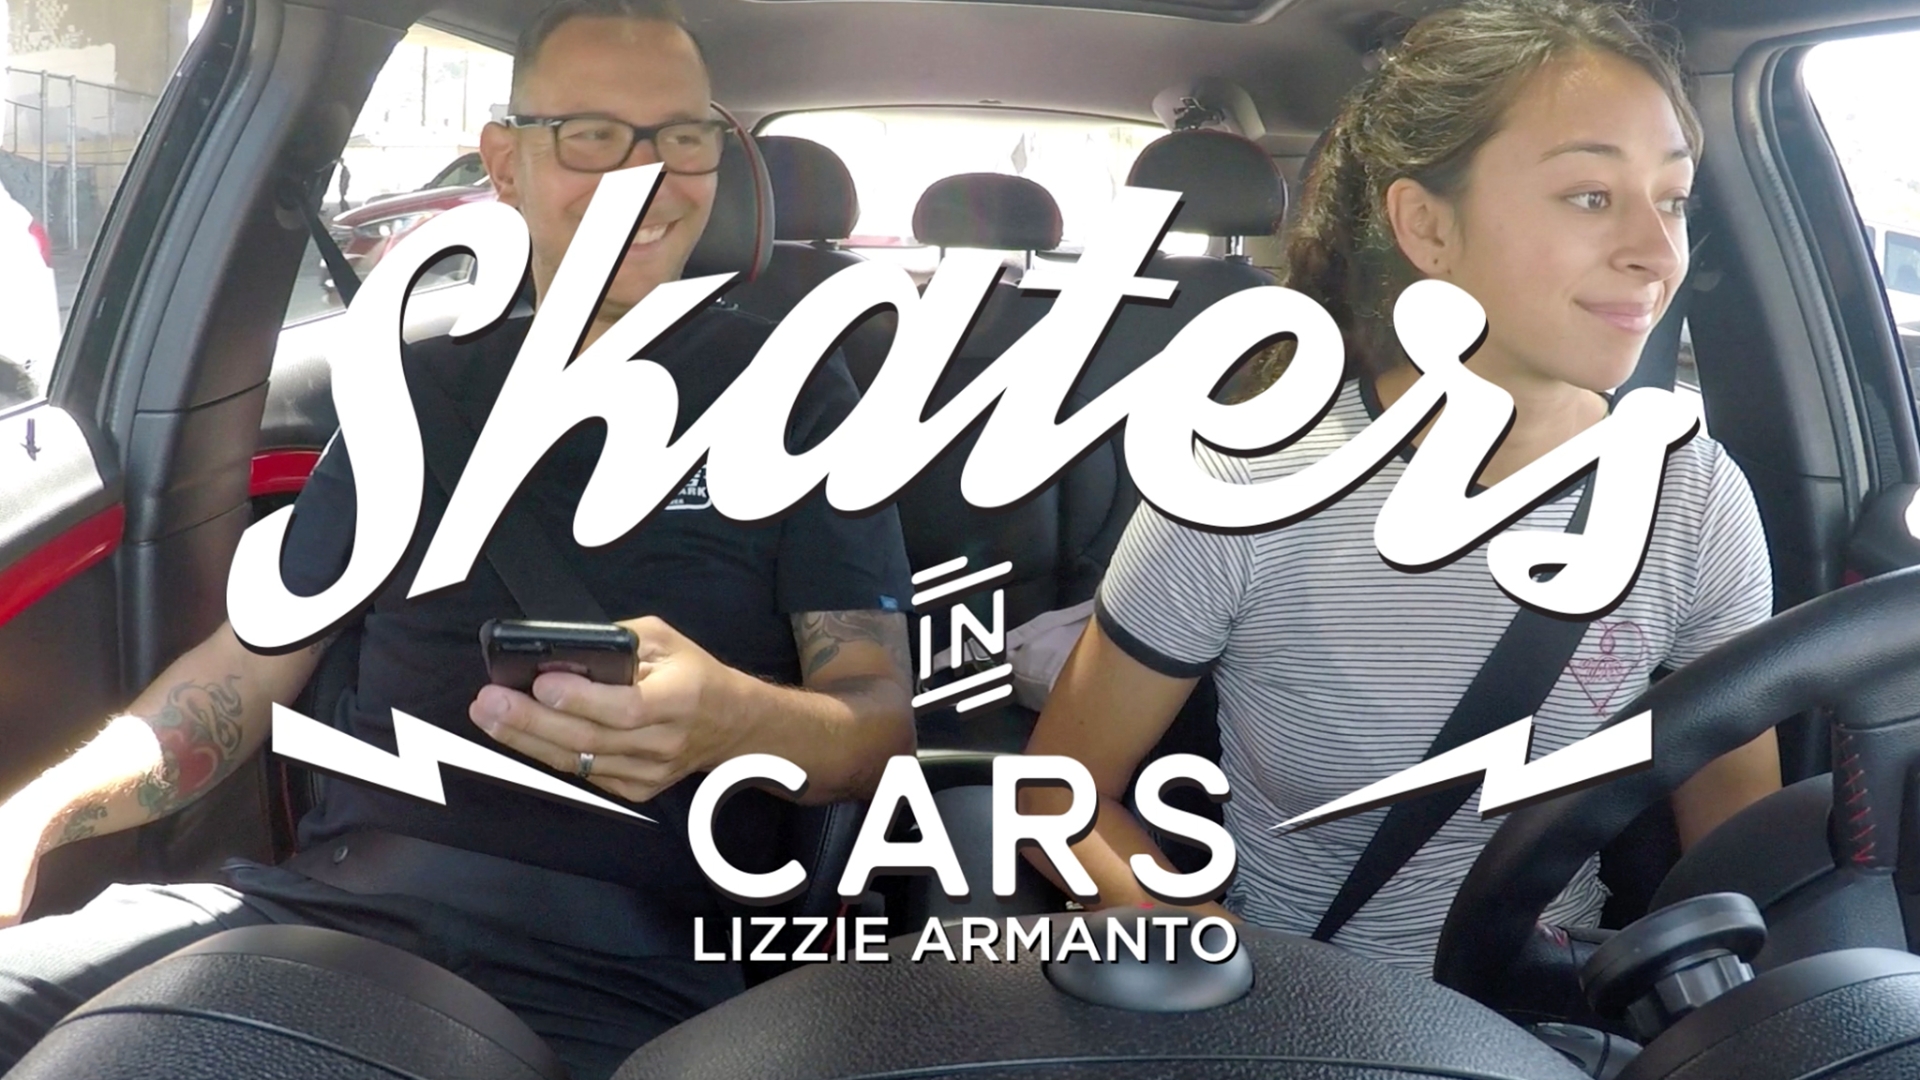 Skaters In Cars Looking At Spots: Lizzie Armanto